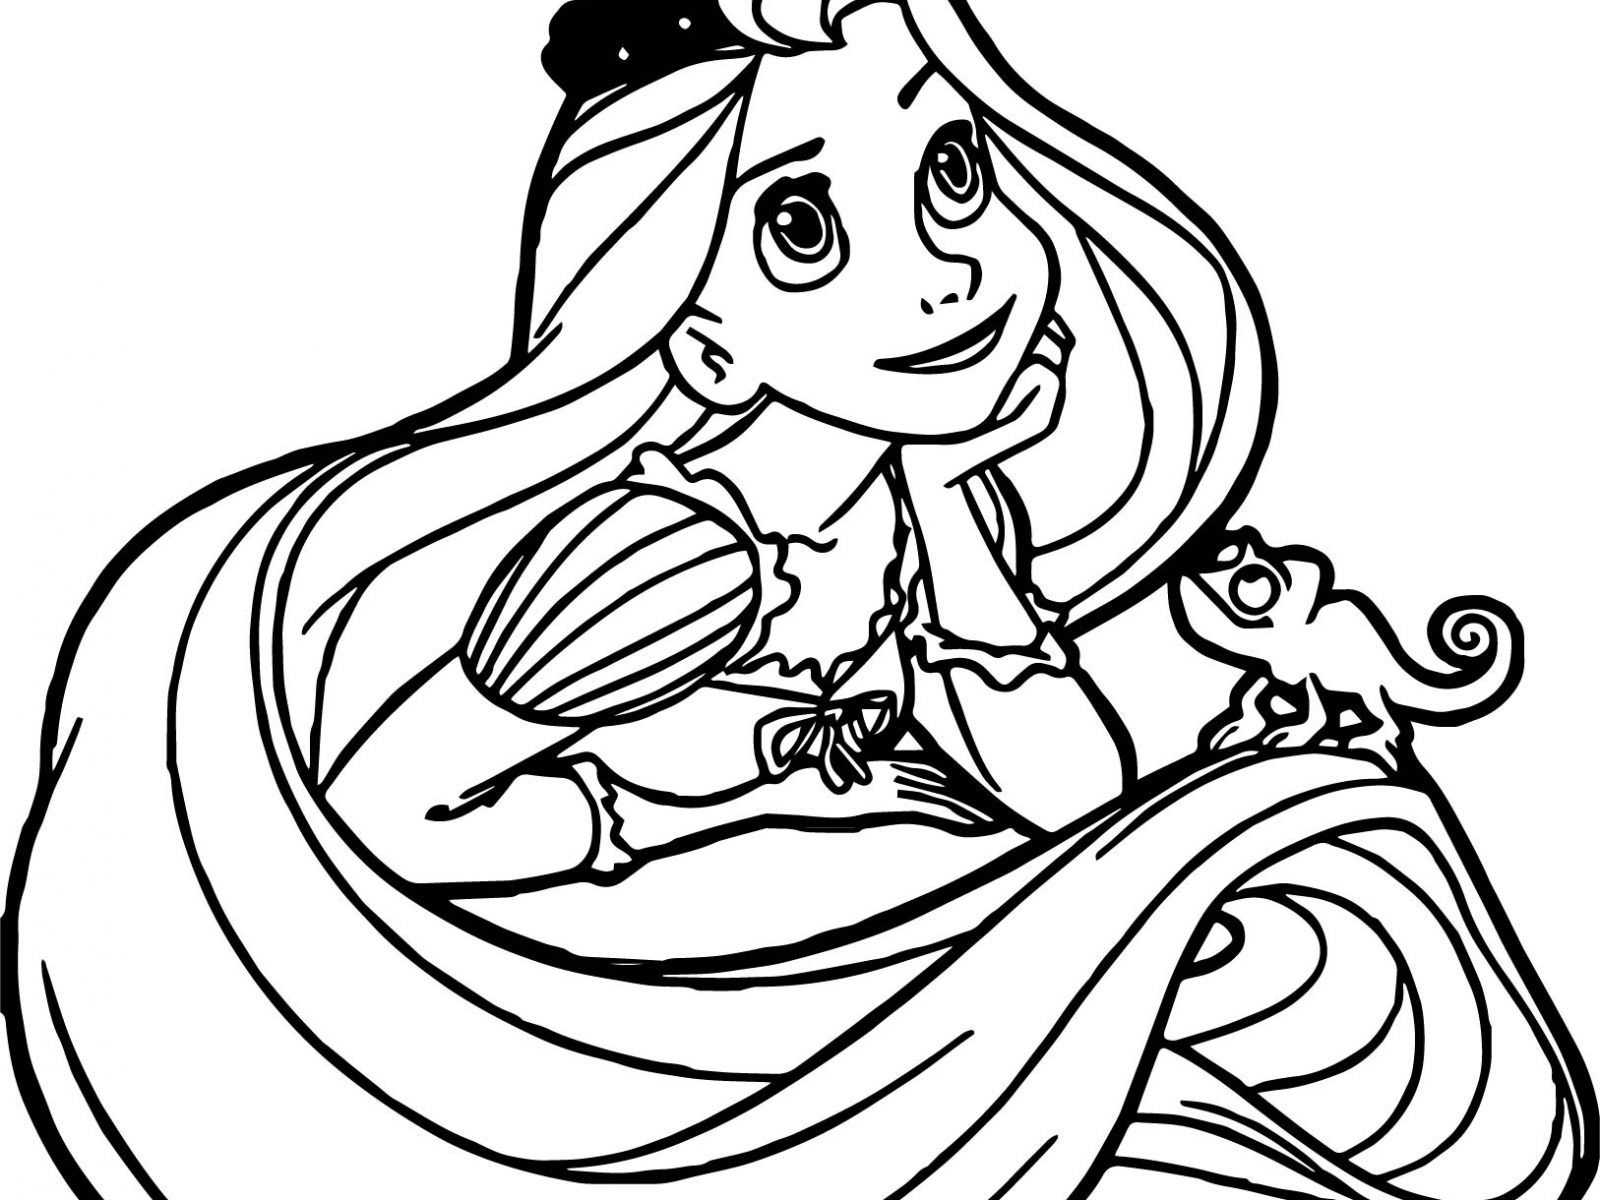 Tangled Tower Coloring Pages at GetDrawings | Free download